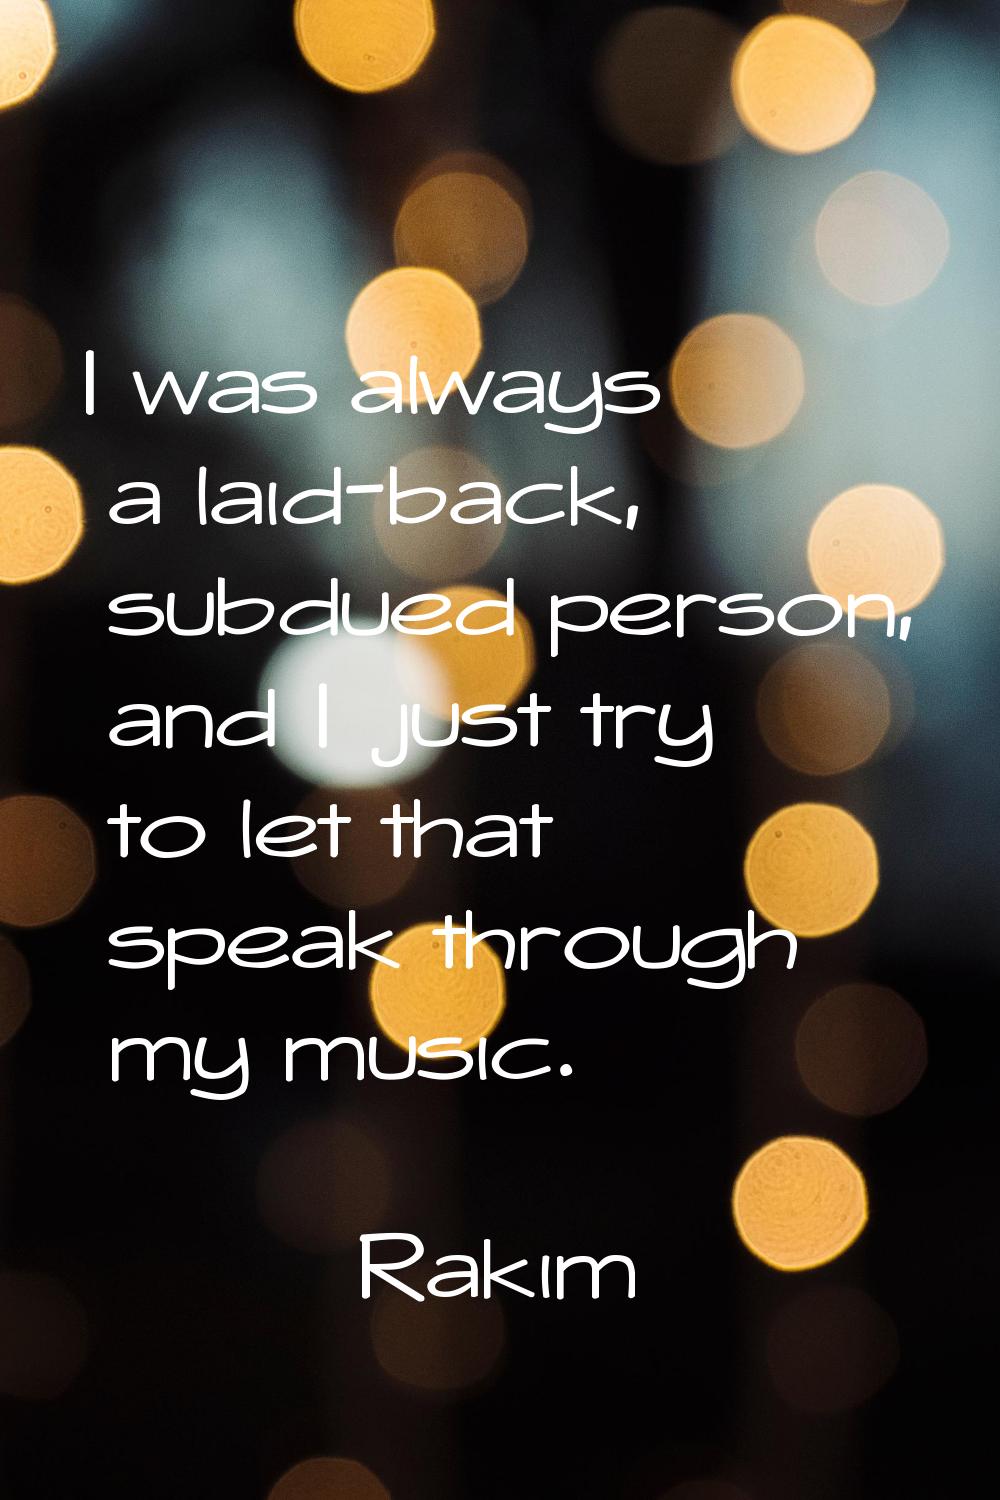 I was always a laid-back, subdued person, and I just try to let that speak through my music.